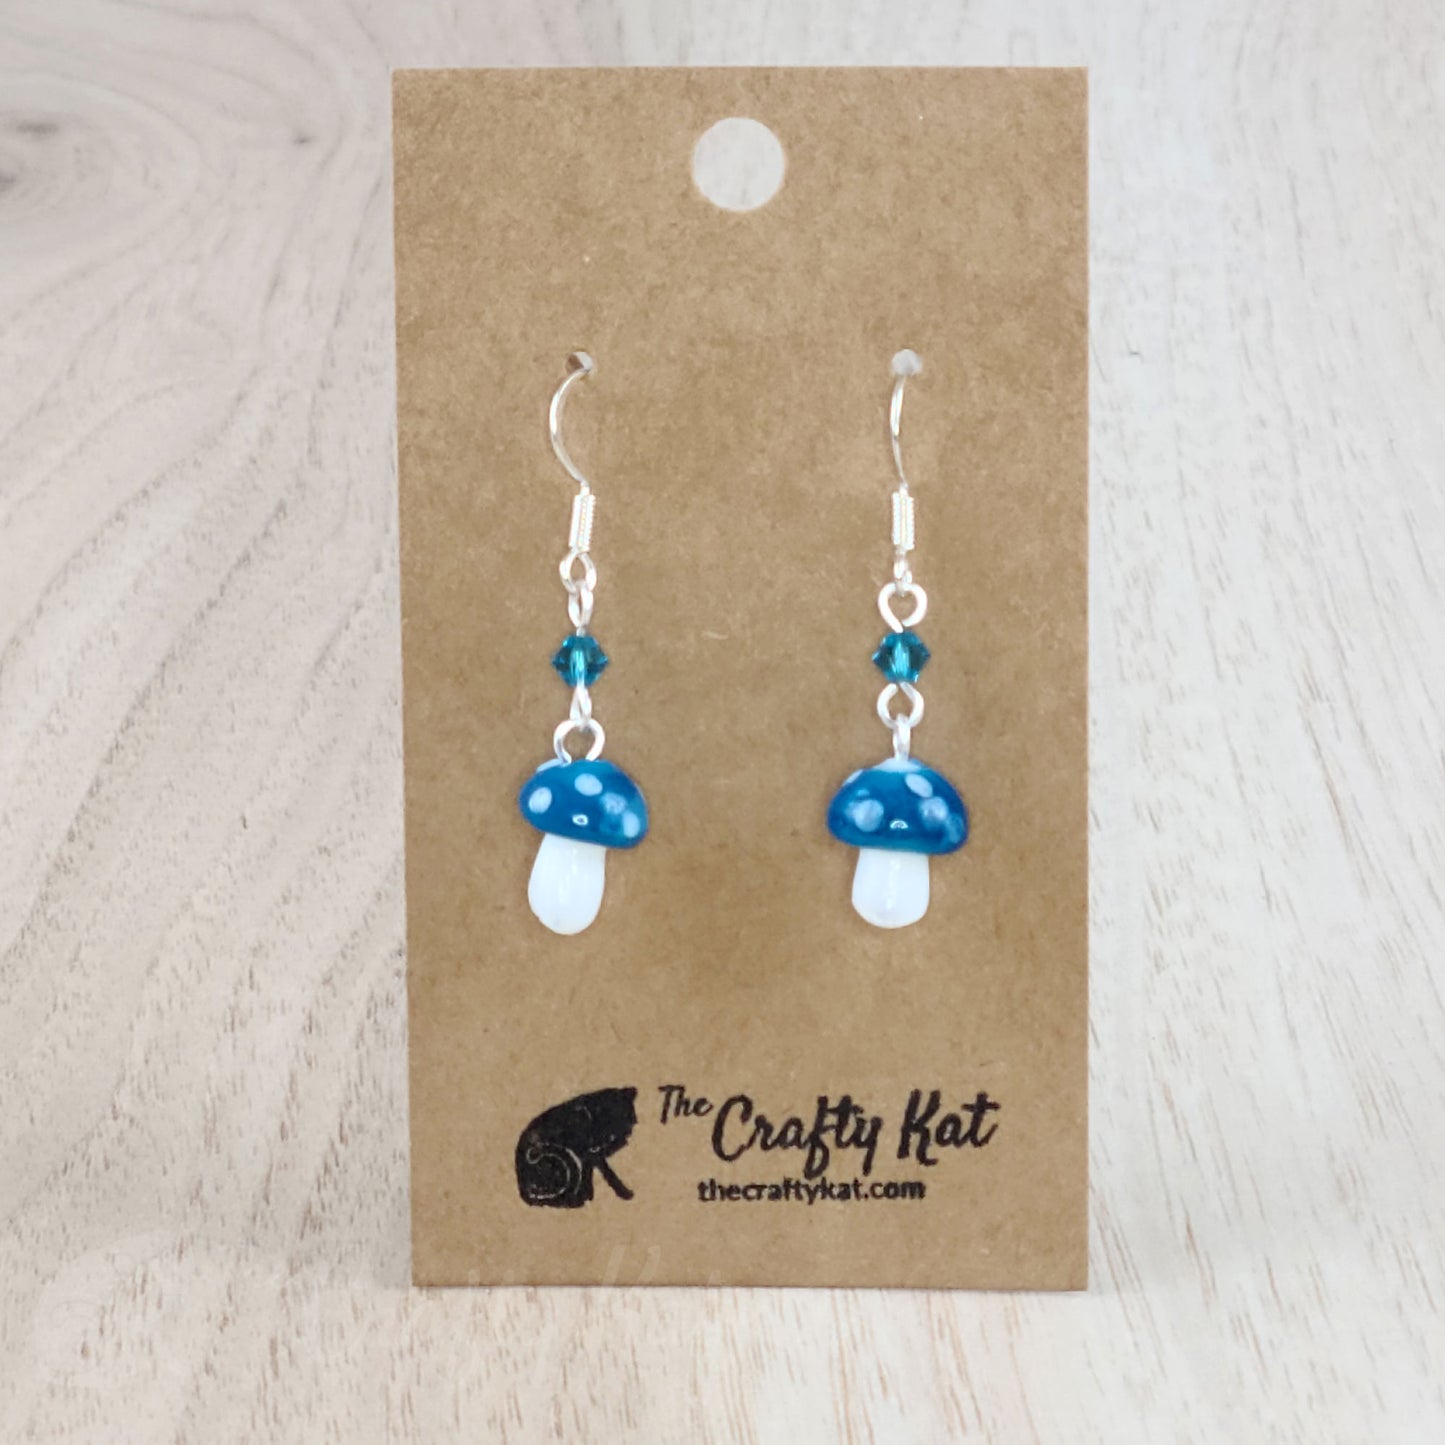 Mushroom-shaped tiered earrings made of lampwork and pressed glass beads with silver-plated base metal fittings. These mushrooms are denim blue with white spots.